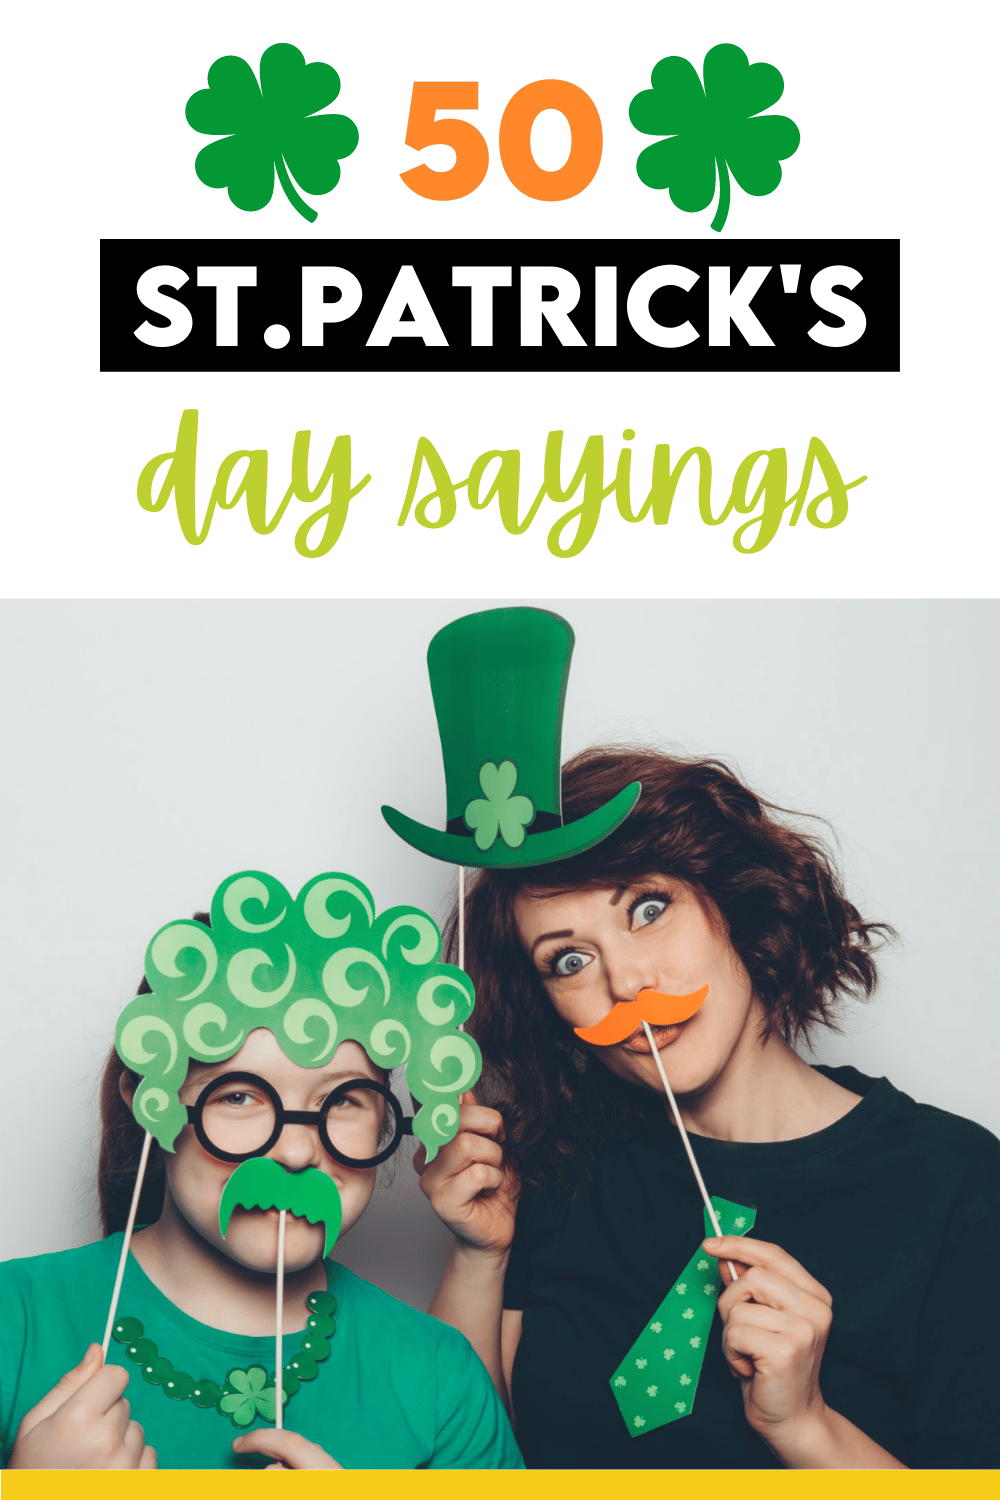 Saving these St. Patrick's Day quotes to incorporate into our party! #stpatricksdayquotes #happystpatricksday | The Dating Divas